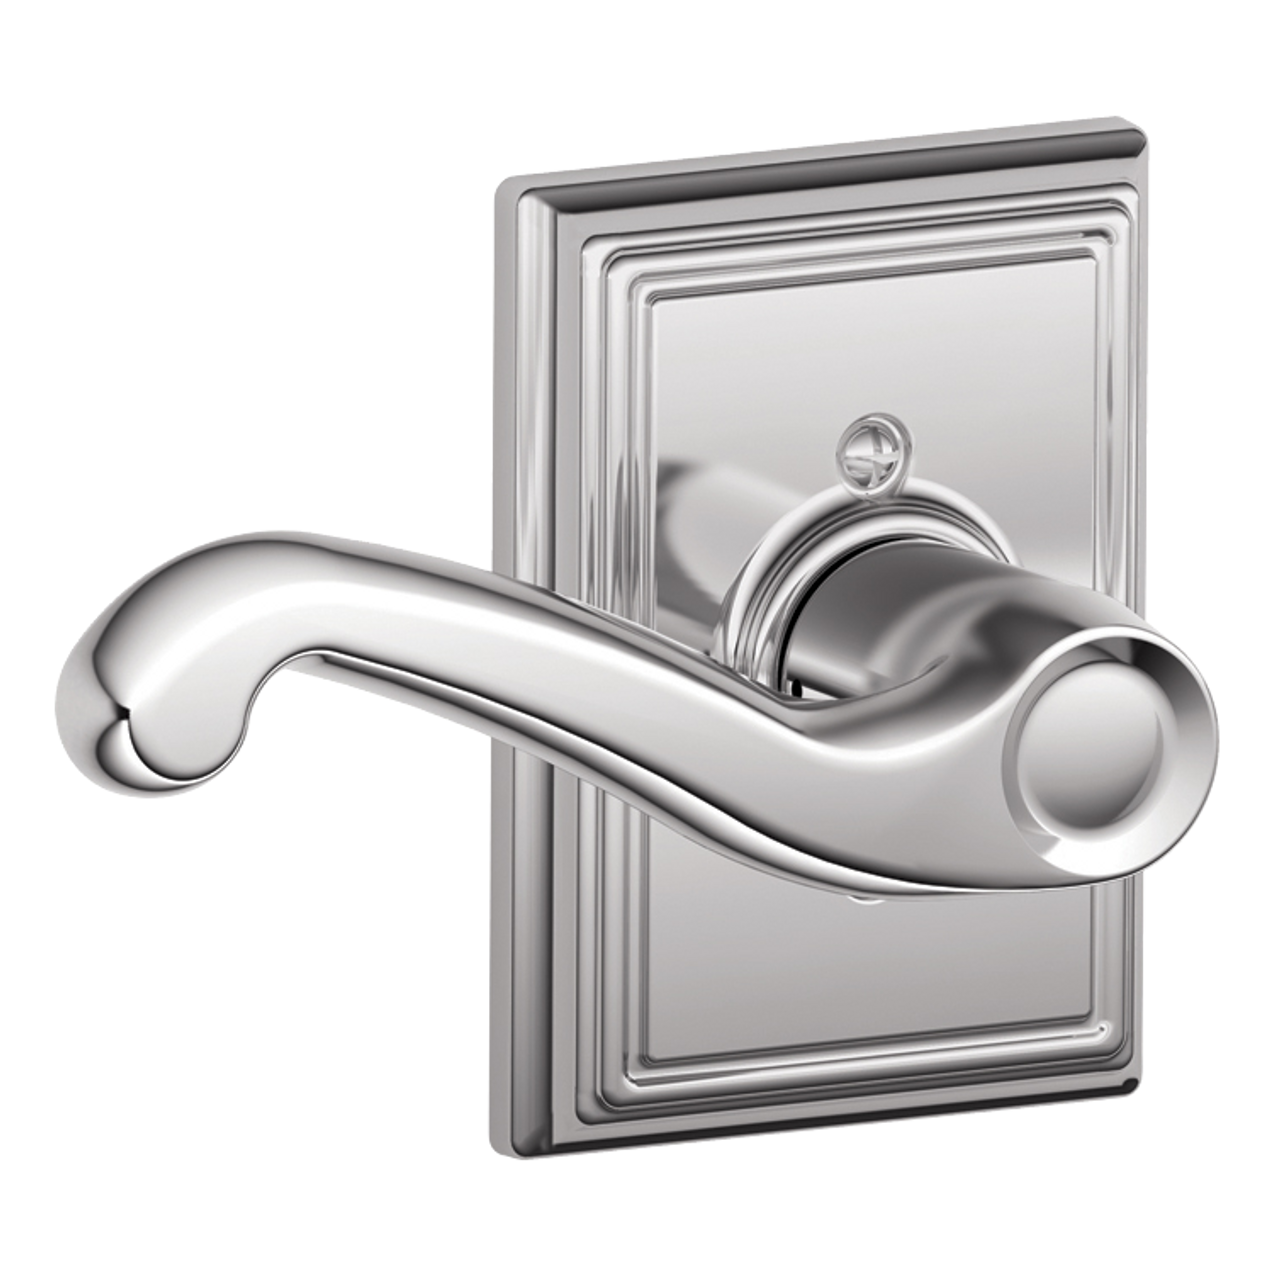 Schlage Flair Lever Non-turning Lock with Addison Trim